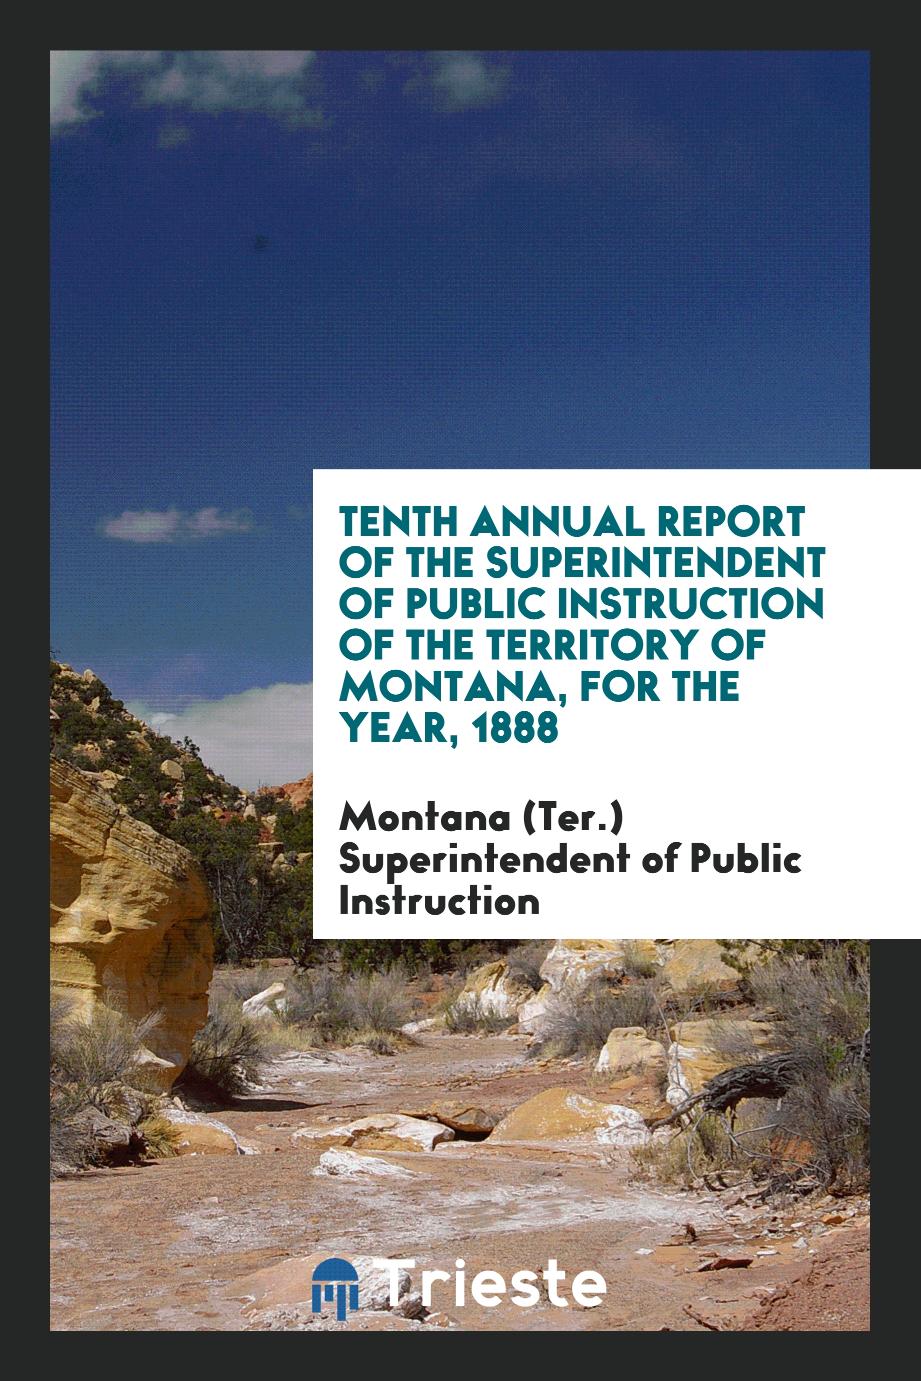 Tenth Annual Report of the Superintendent of Public Instruction of the Territory of Montana, for the year, 1888